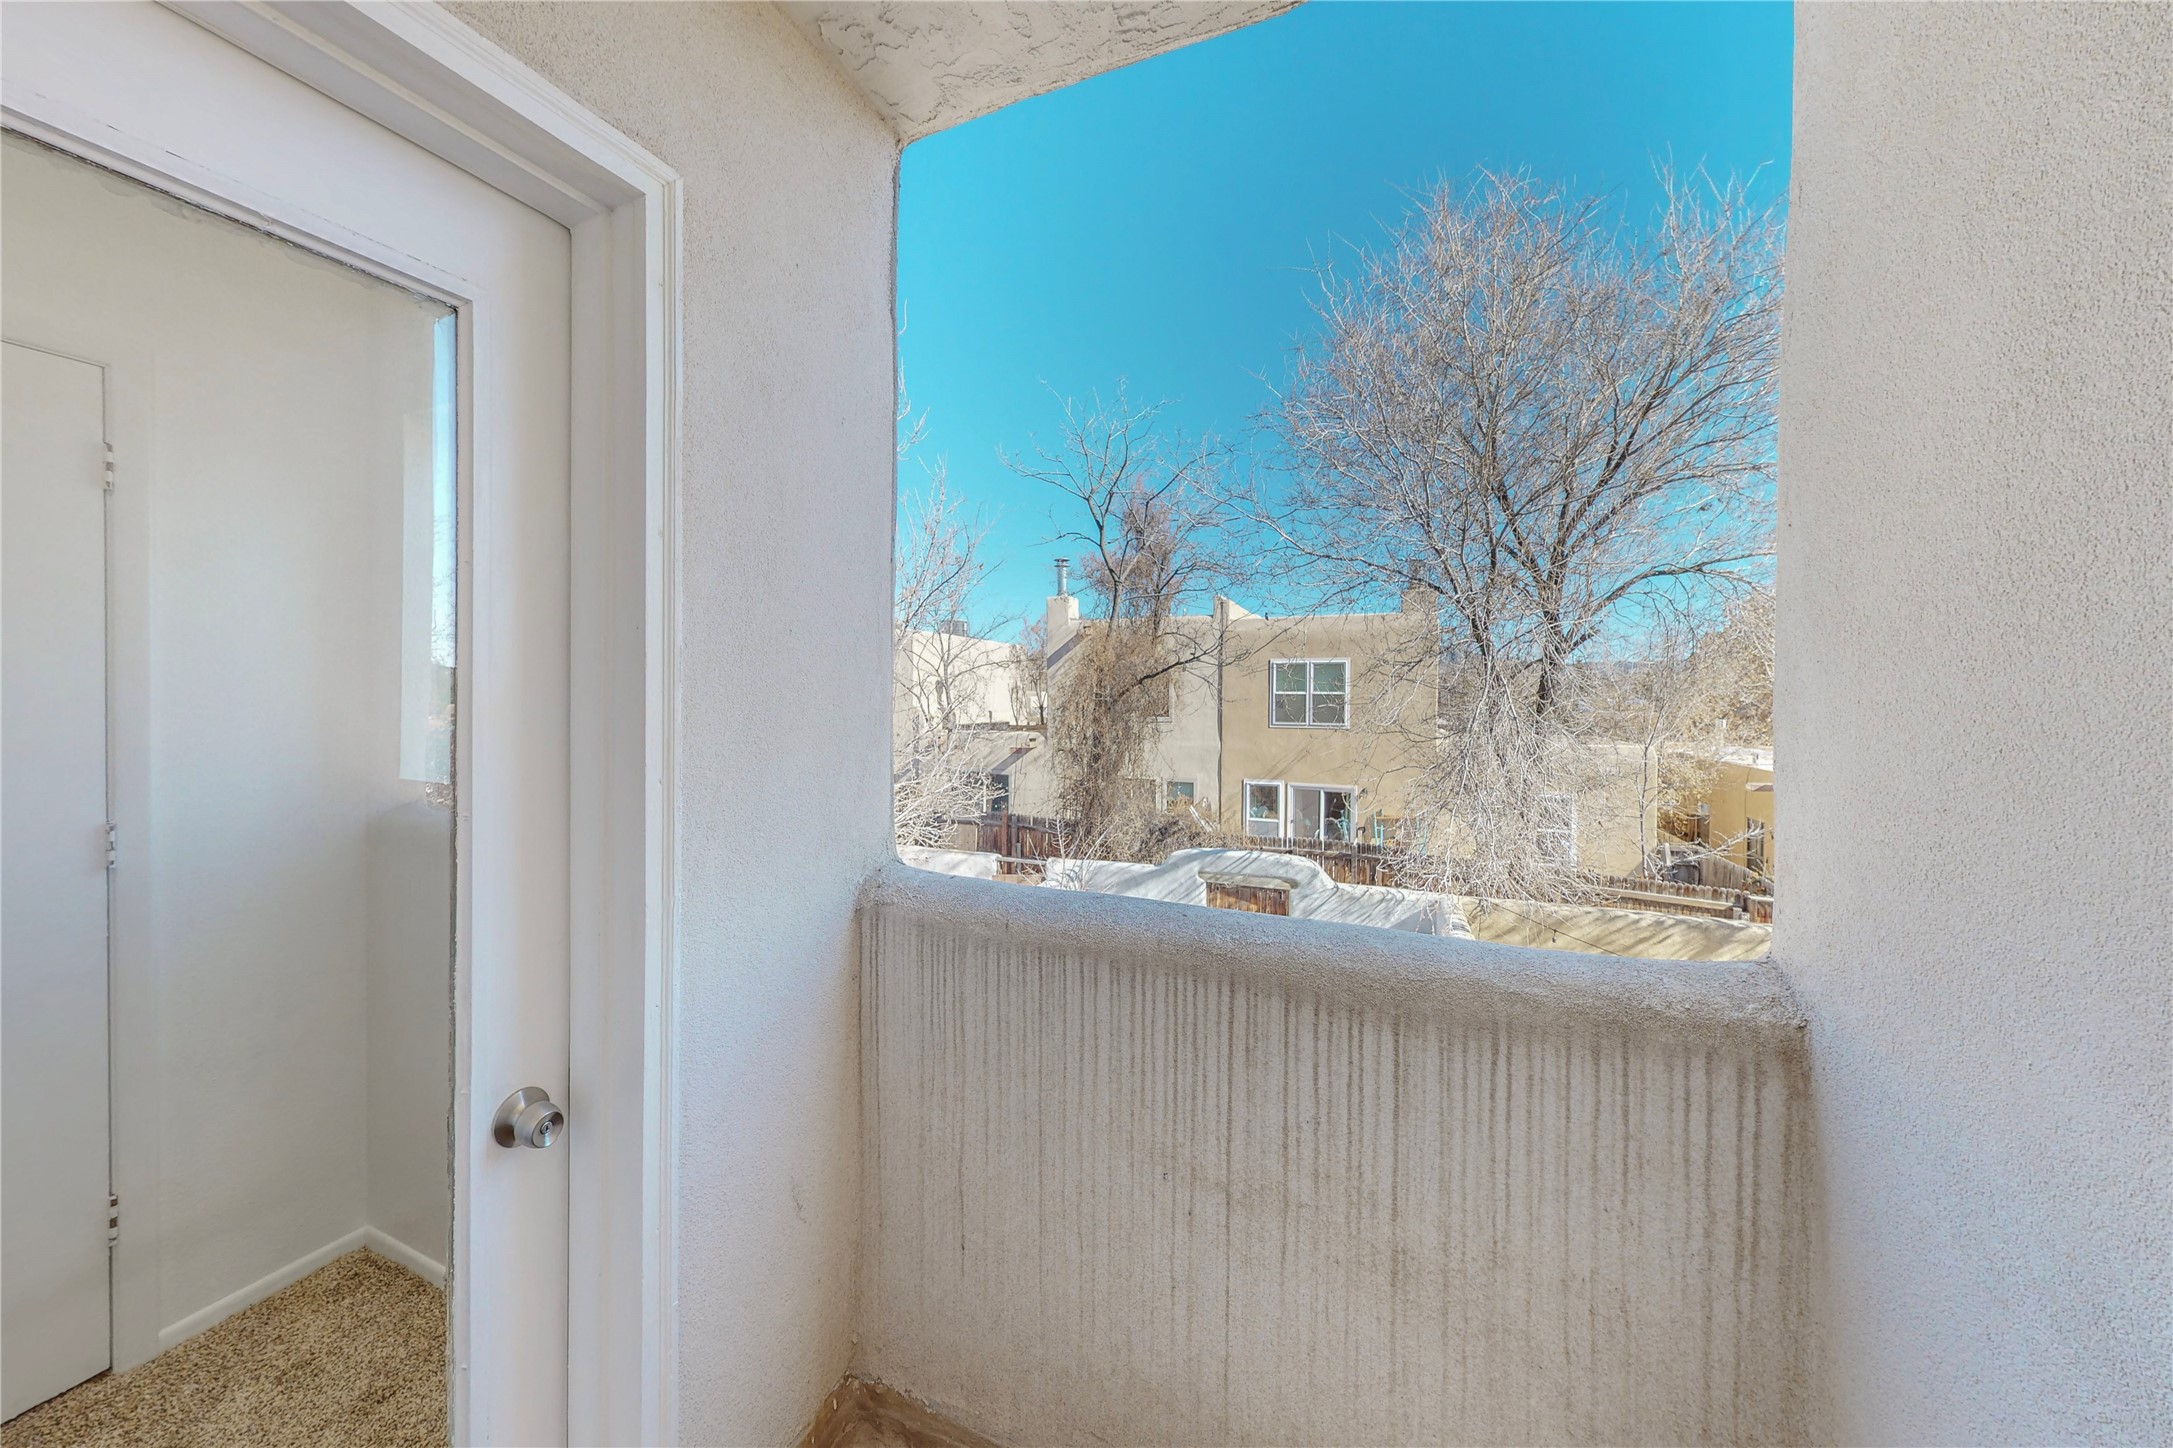 2732 Calle Anna Jean D, Santa Fe, New Mexico 87505, 2 Bedrooms Bedrooms, ,3 BathroomsBathrooms,Residential,For Sale,2732 Calle Anna Jean D,202233936